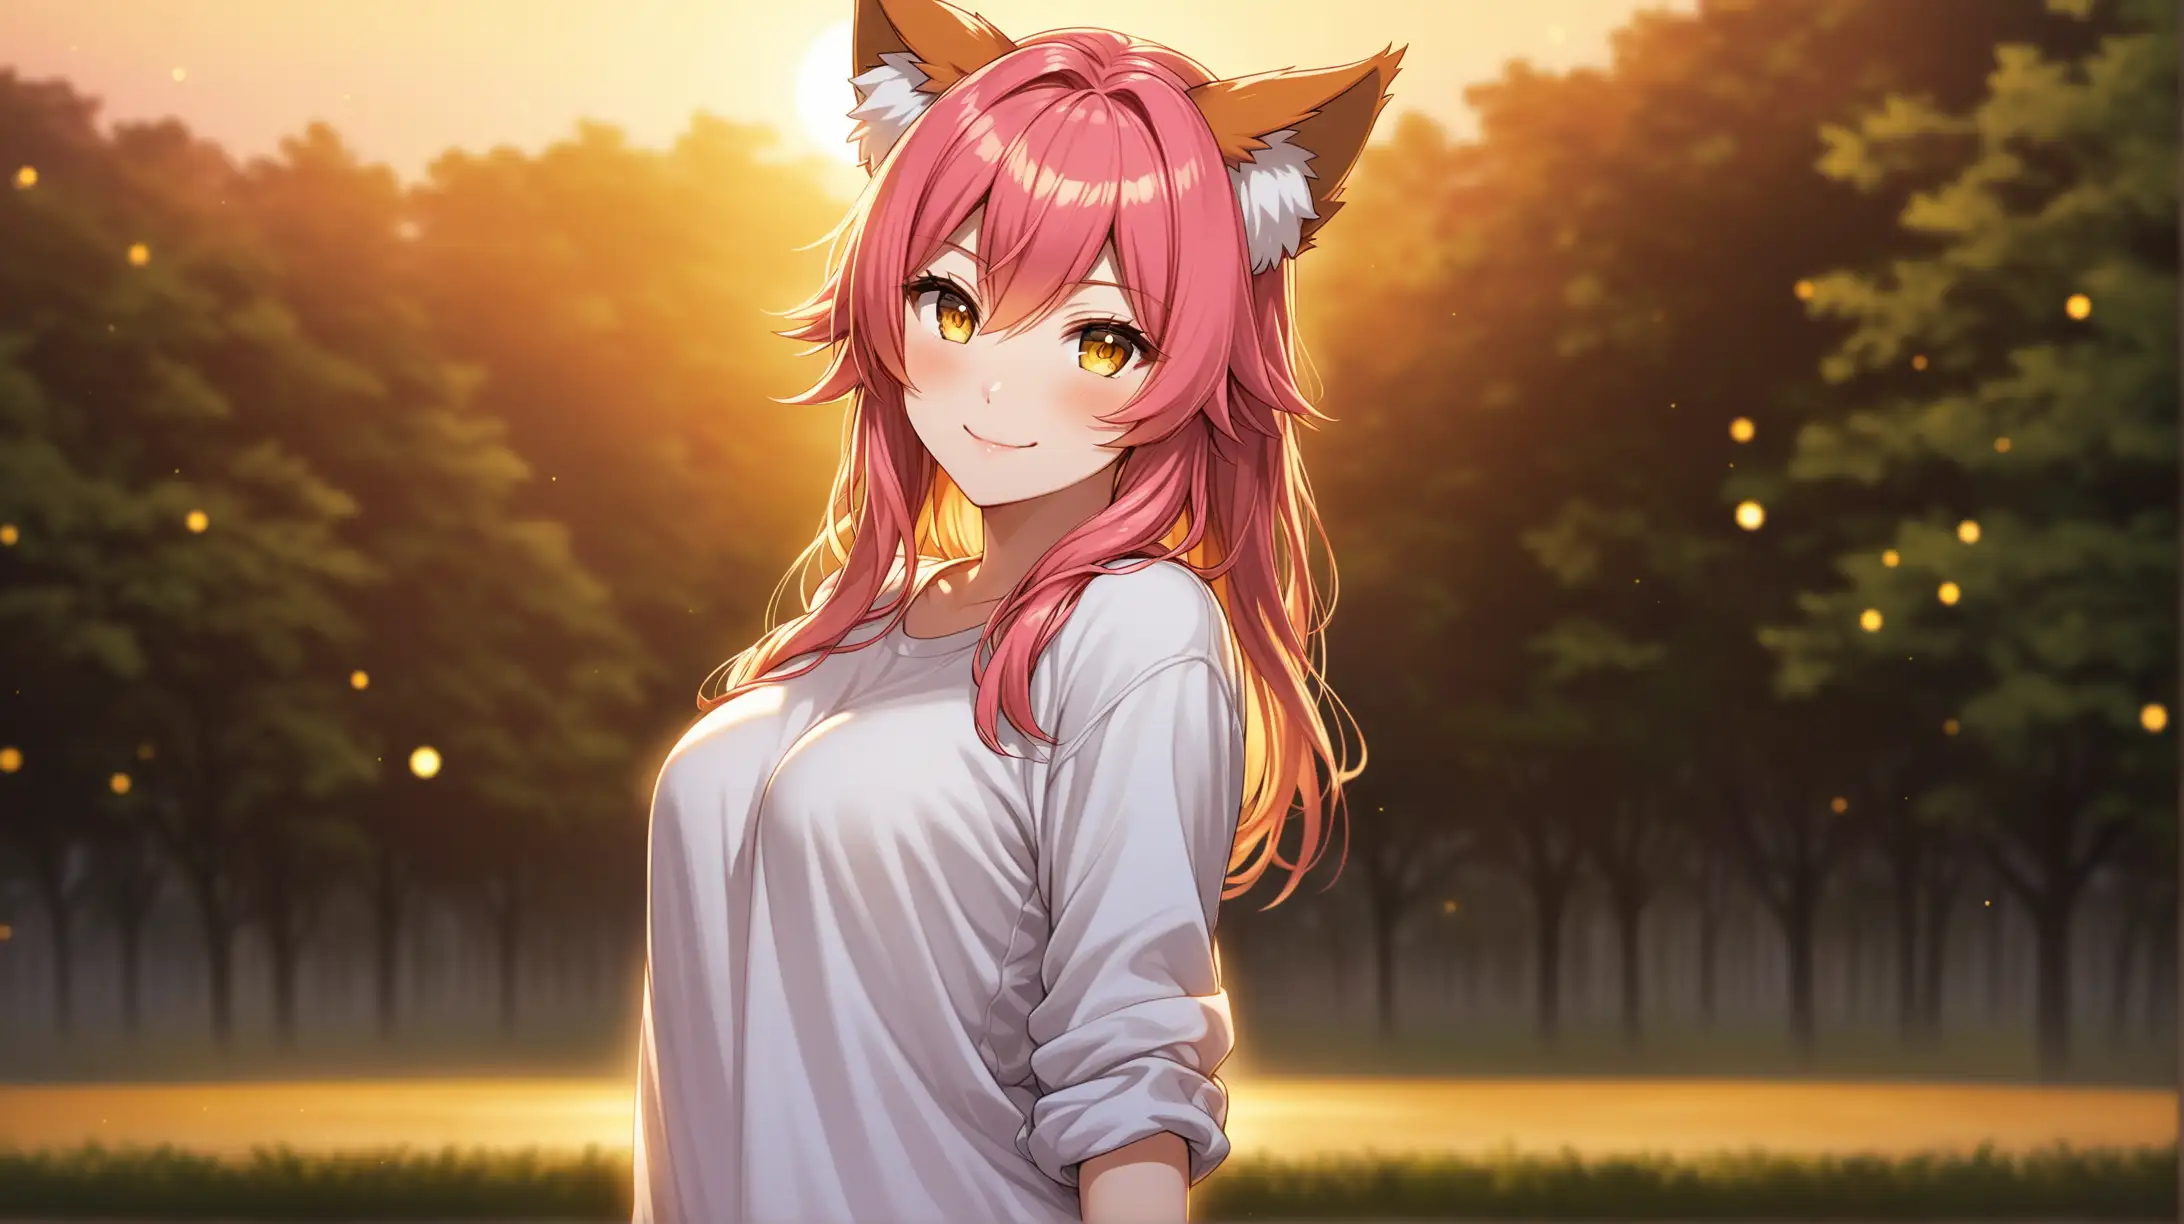 Draw the character Tamamo no Mae, pink hair, gold eyes, high quality, ambient lighting, long shot, standing, outdoors, in a seductive pose, casual clothing, smiling at the viewer